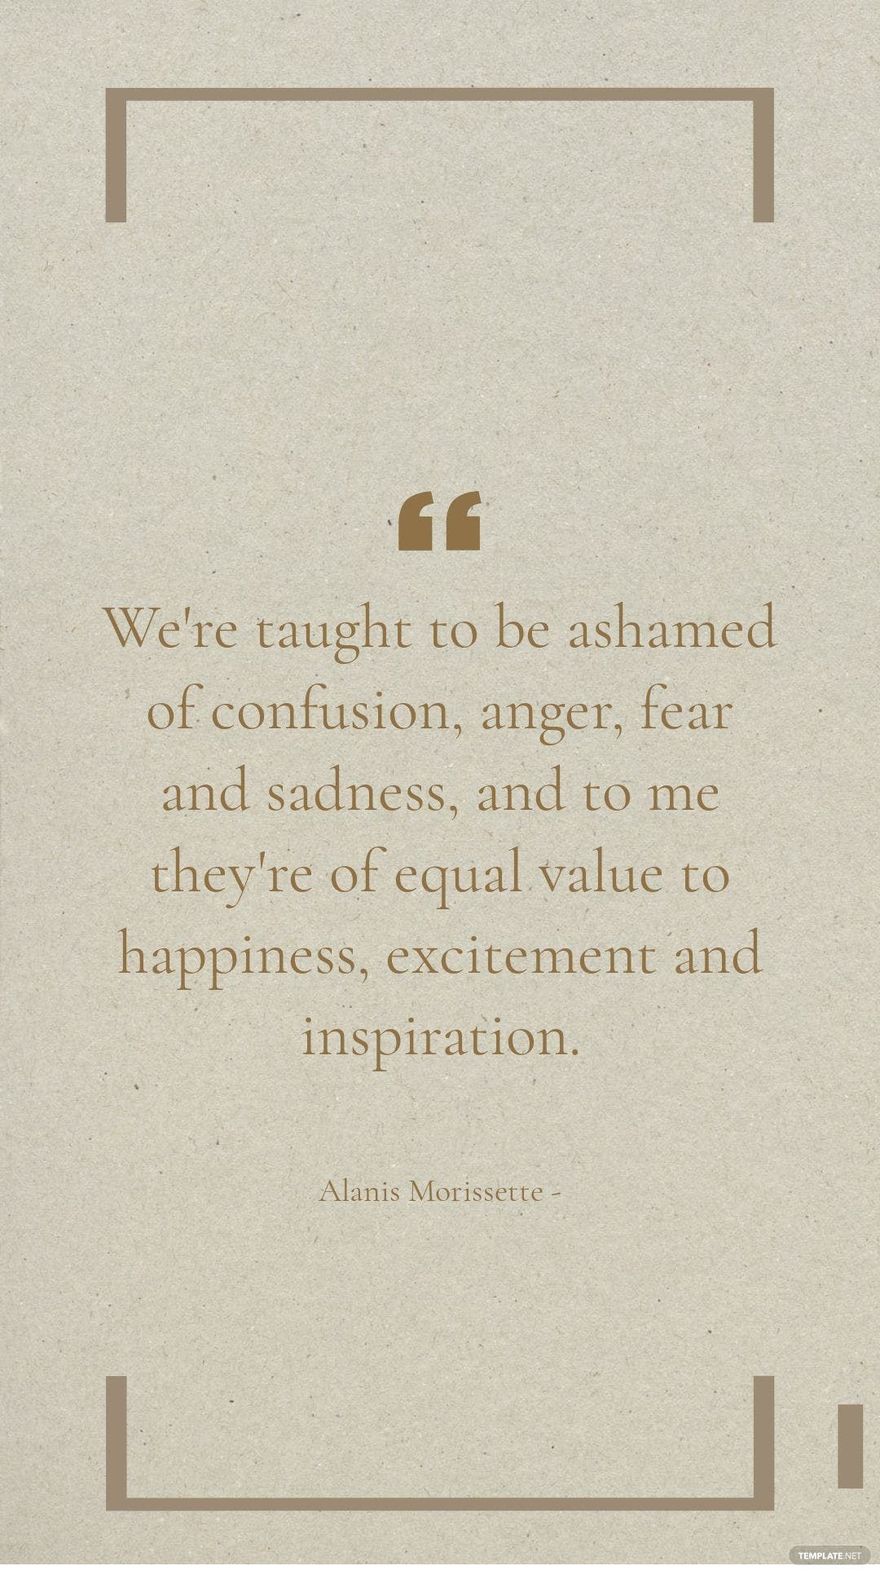 Alanis Morissette - We're taught to be ashamed of confusion, anger, fear and sadness, and to me they're of equal value to happiness, excitement and inspiration.